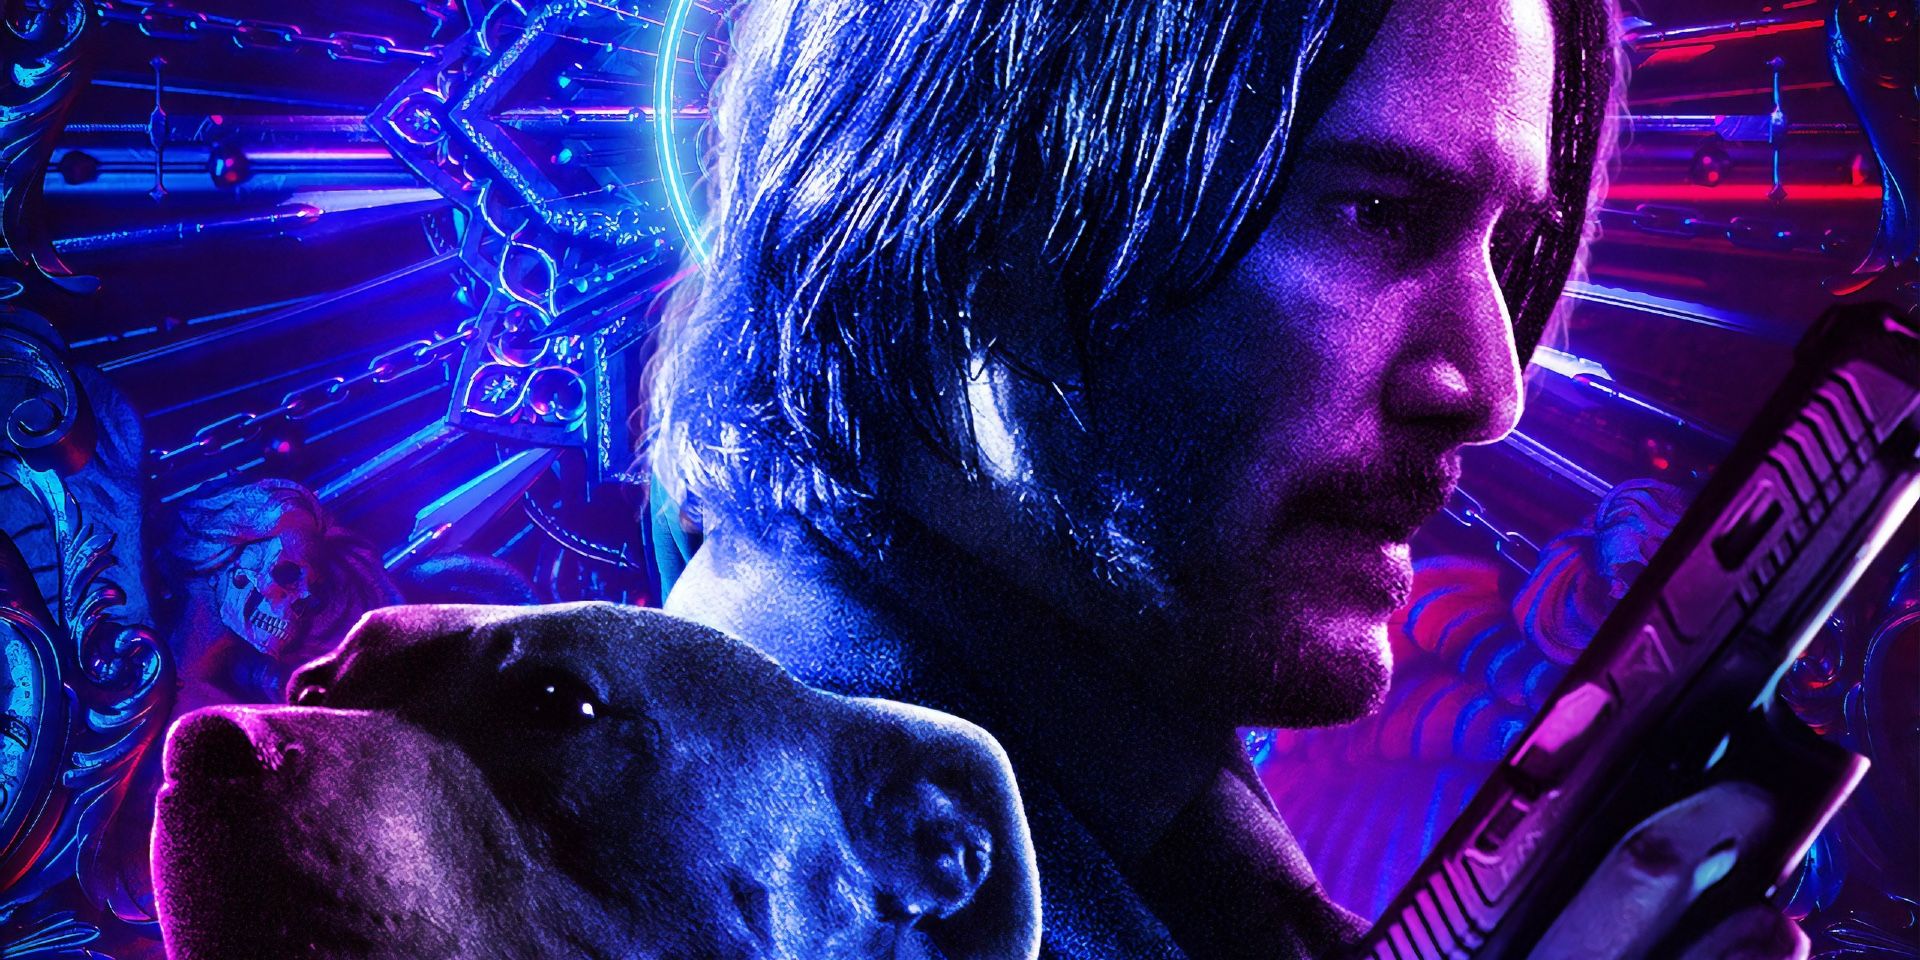 John Wick Chapter 4 Slides Into A March 2023 Release • Flixist 0023